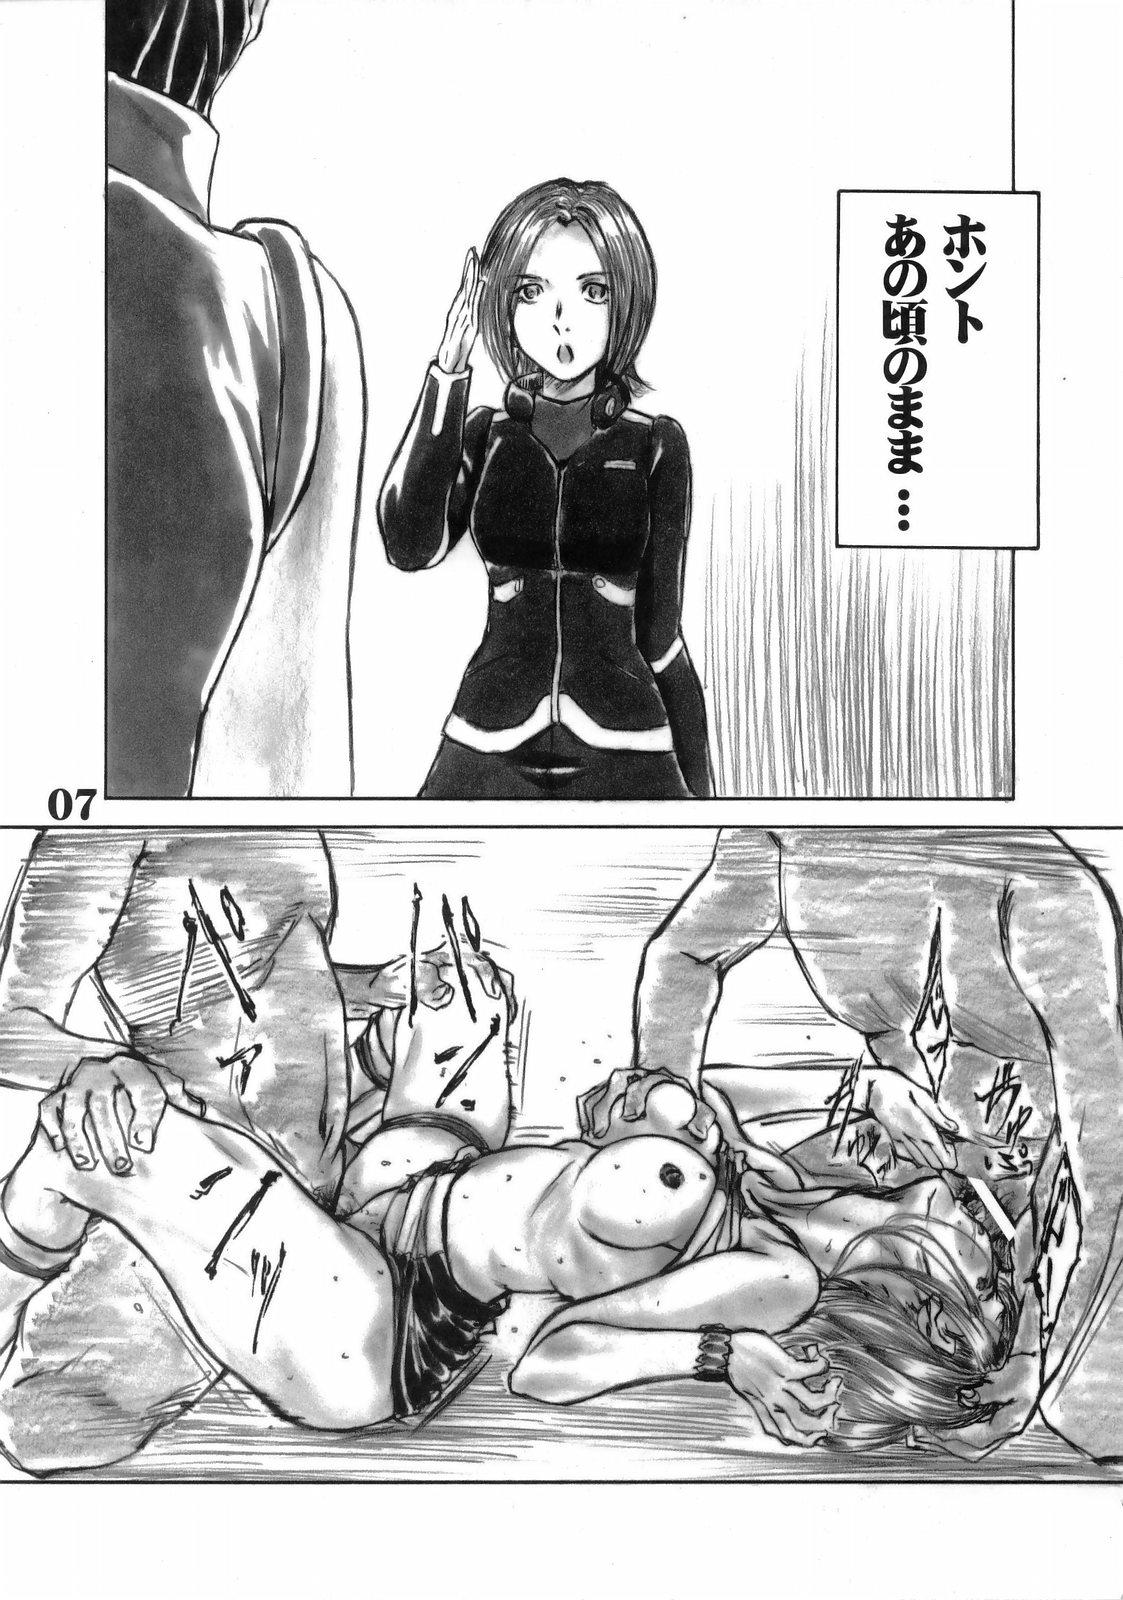 Mother fuck Under Blue 13 - Eureka 7 Colombia - Page 8